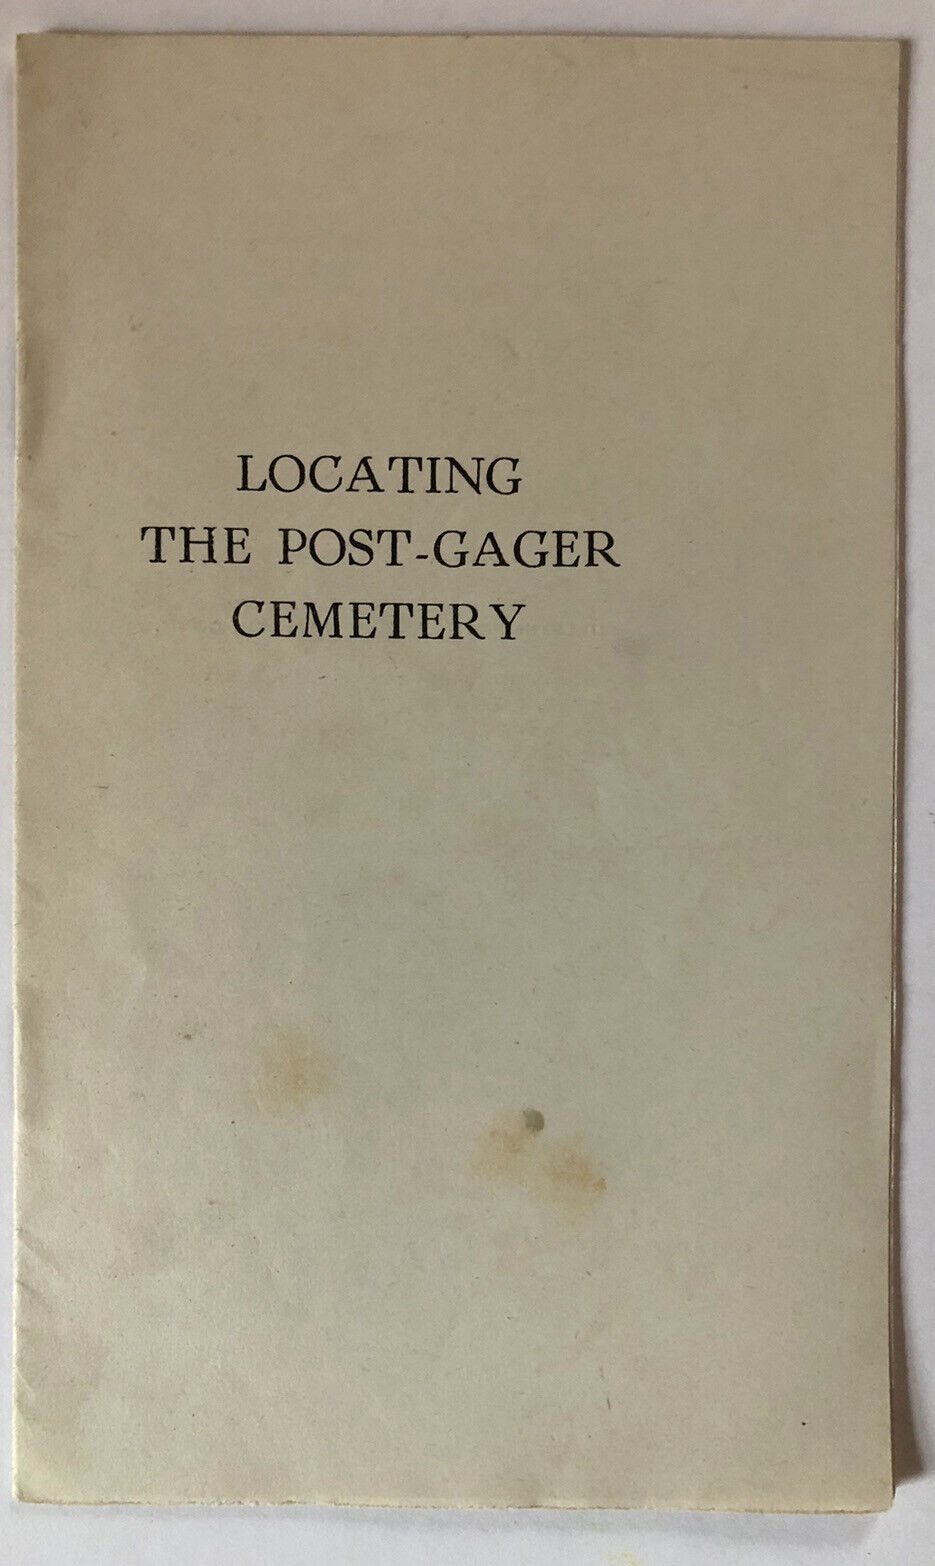 NORWICH CT 1929 Founders Cemetery LOCATING POST-GAGER BURIAL GROUNDS Pamphlet